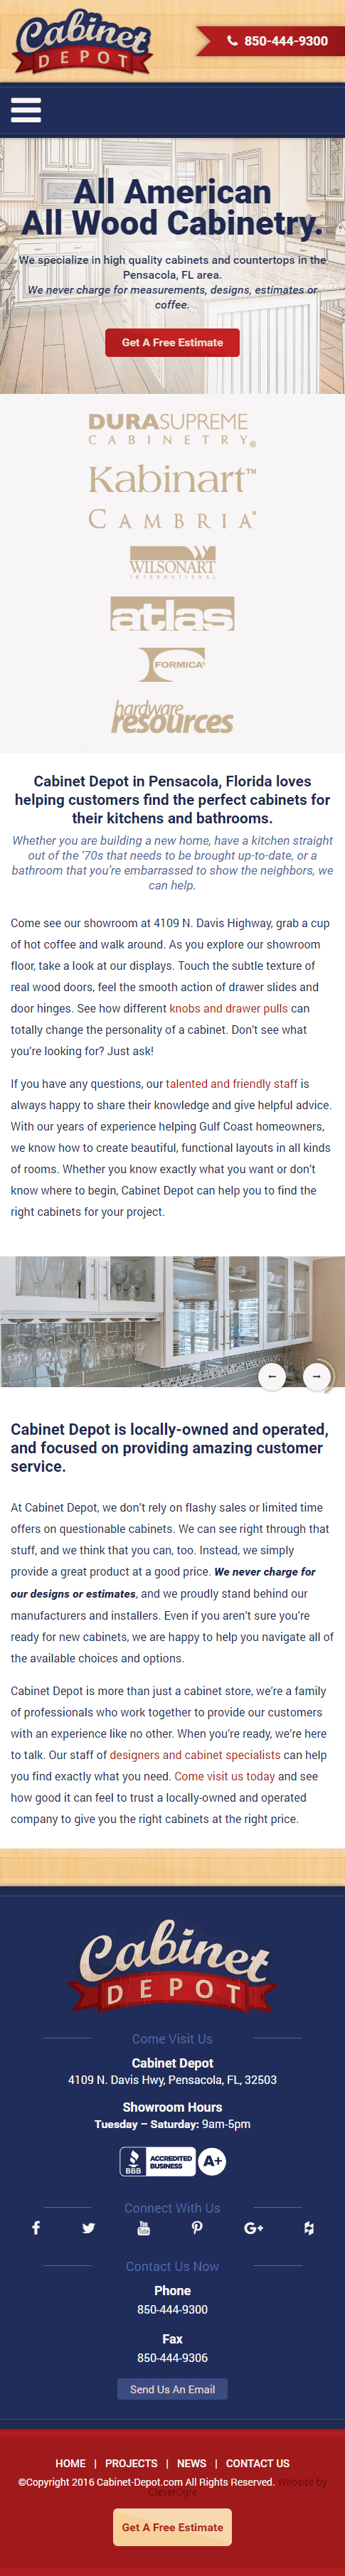 Mockup of Cabinet Depot website homepage by CleverOgre on mobile device